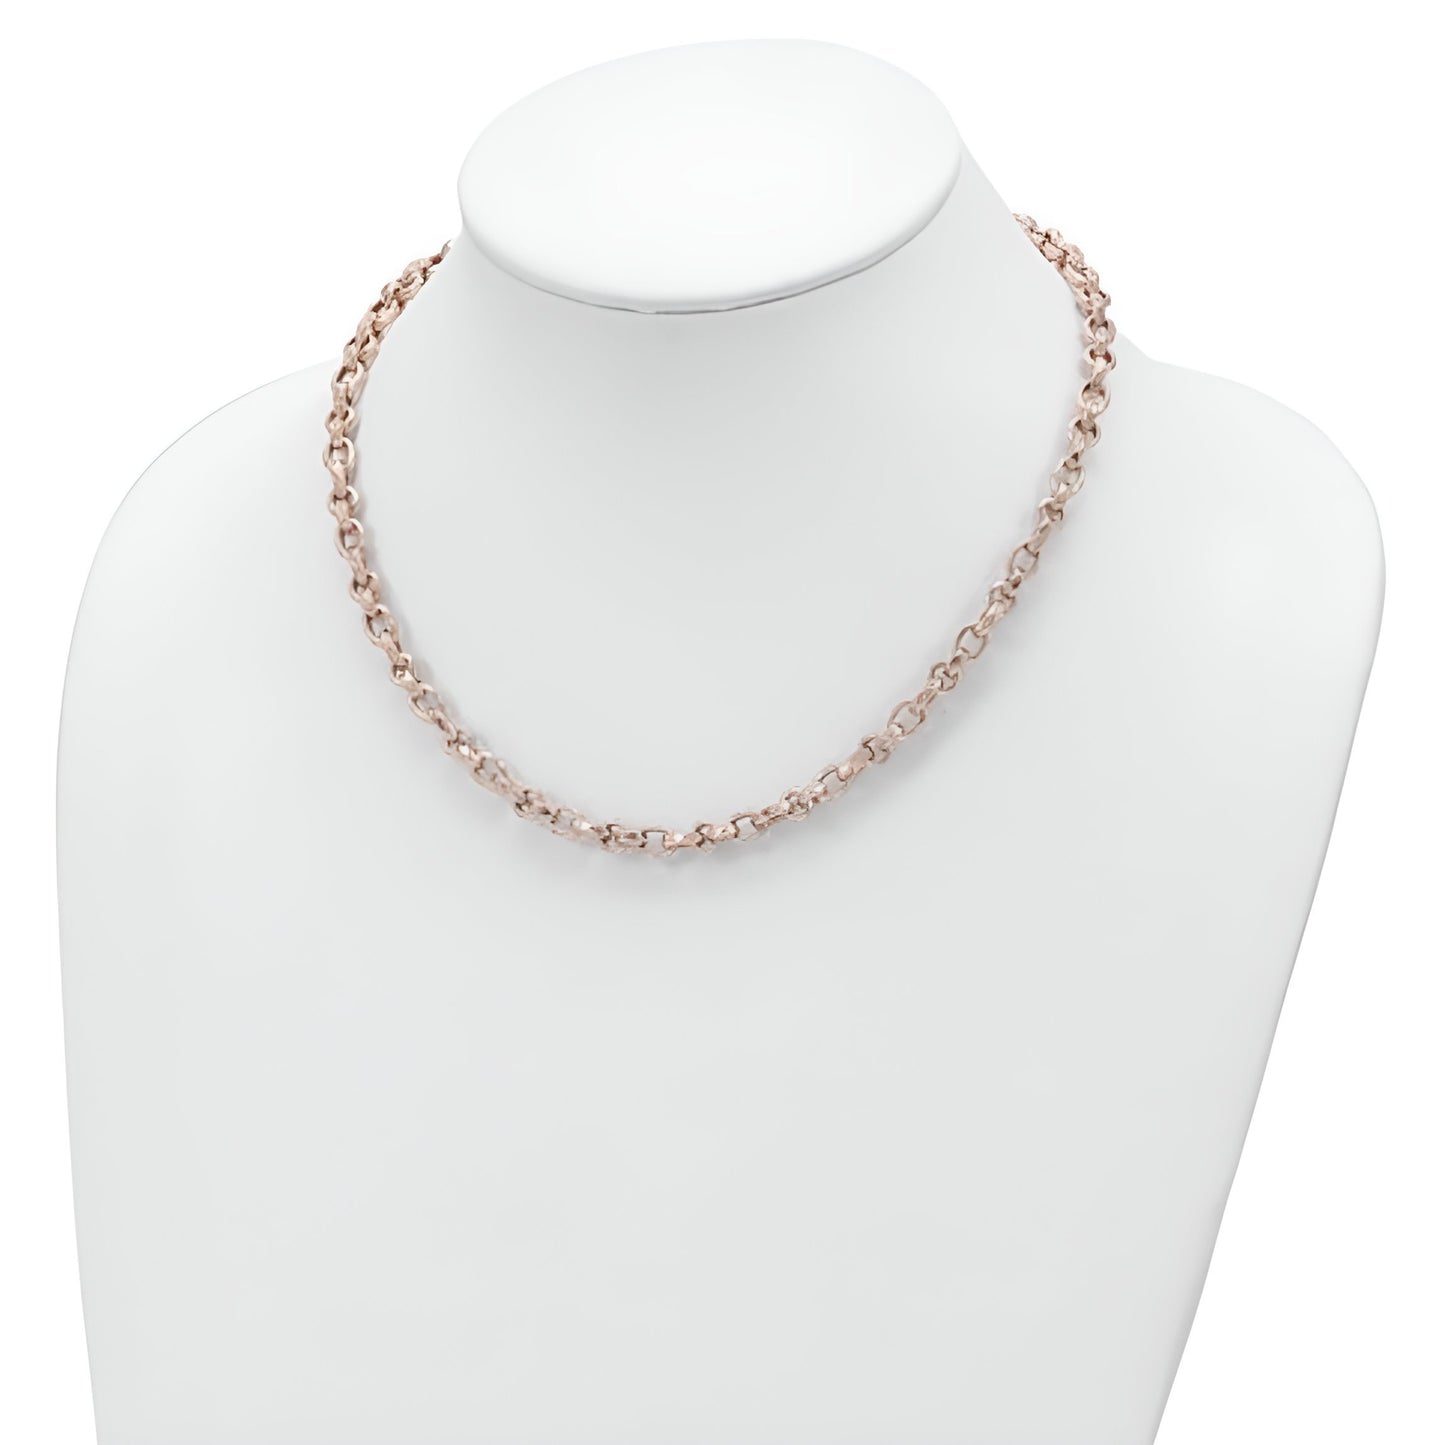 Rose Gold Link Chain